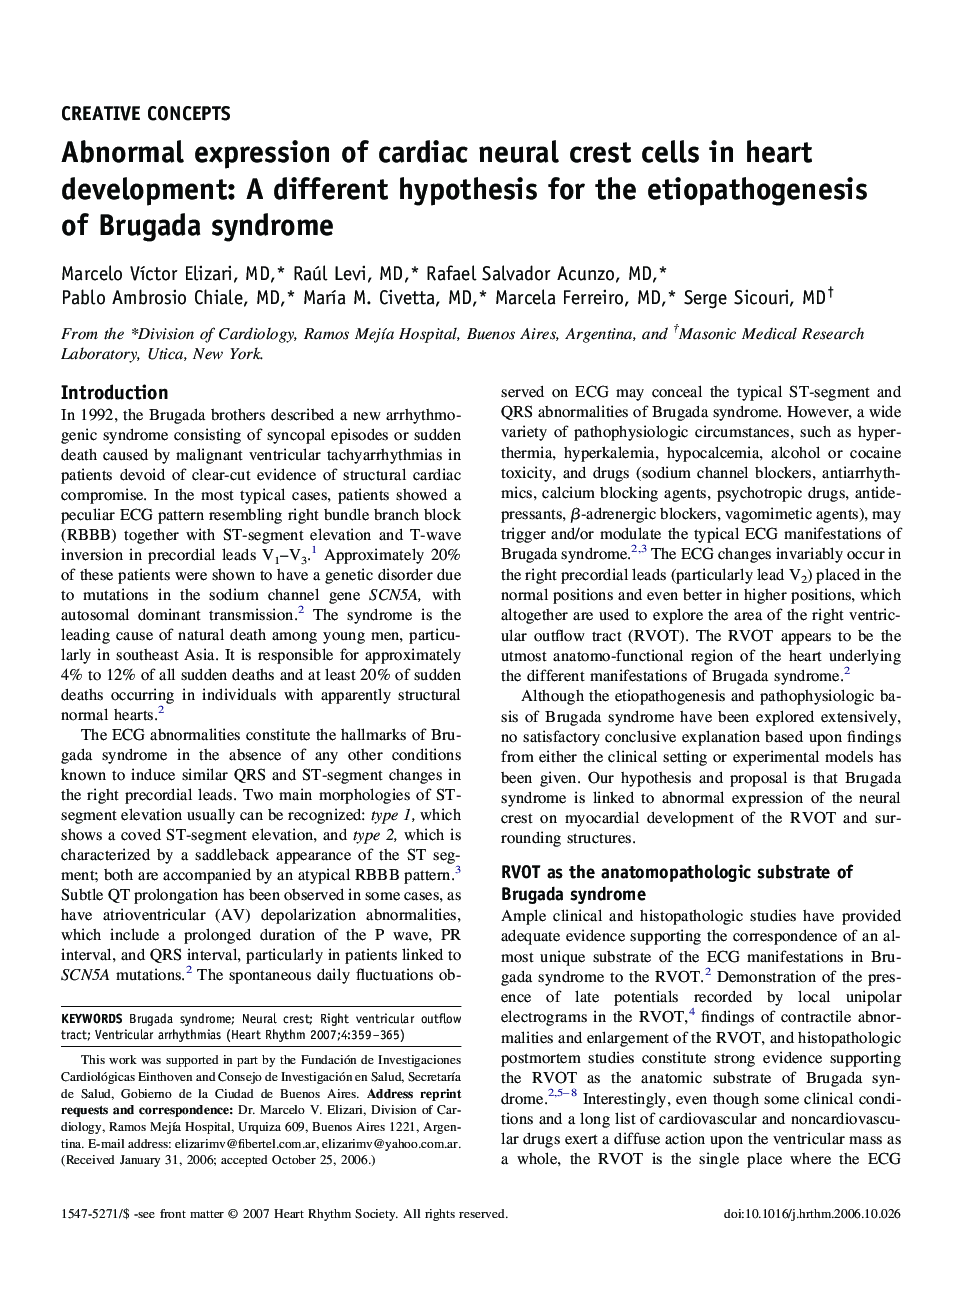 Abnormal expression of cardiac neural crest cells in heart development: A different hypothesis for the etiopathogenesis of Brugada syndrome